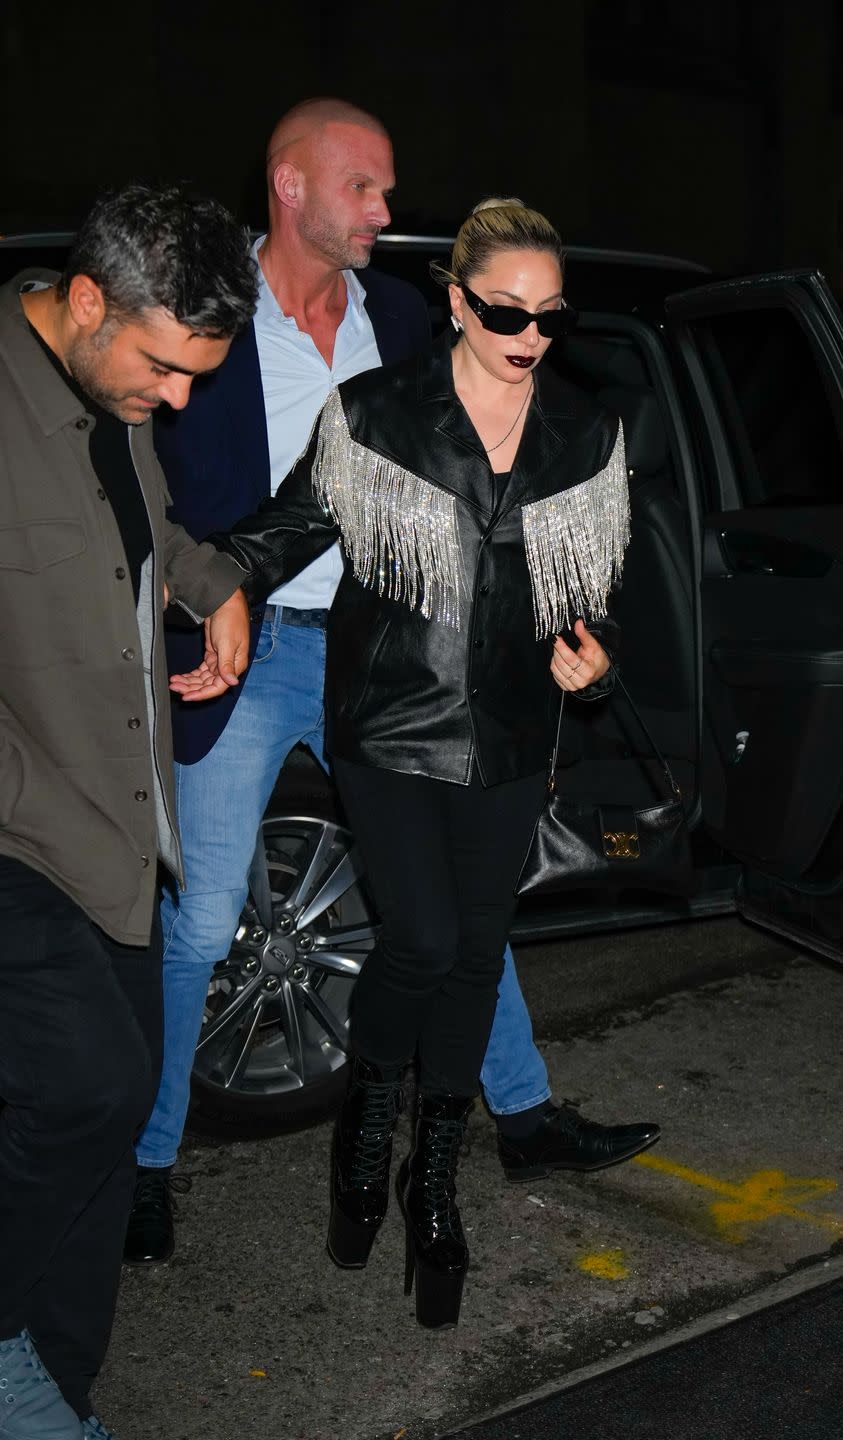 Lady Gaga in a leather jacket with fringe and diamond heels